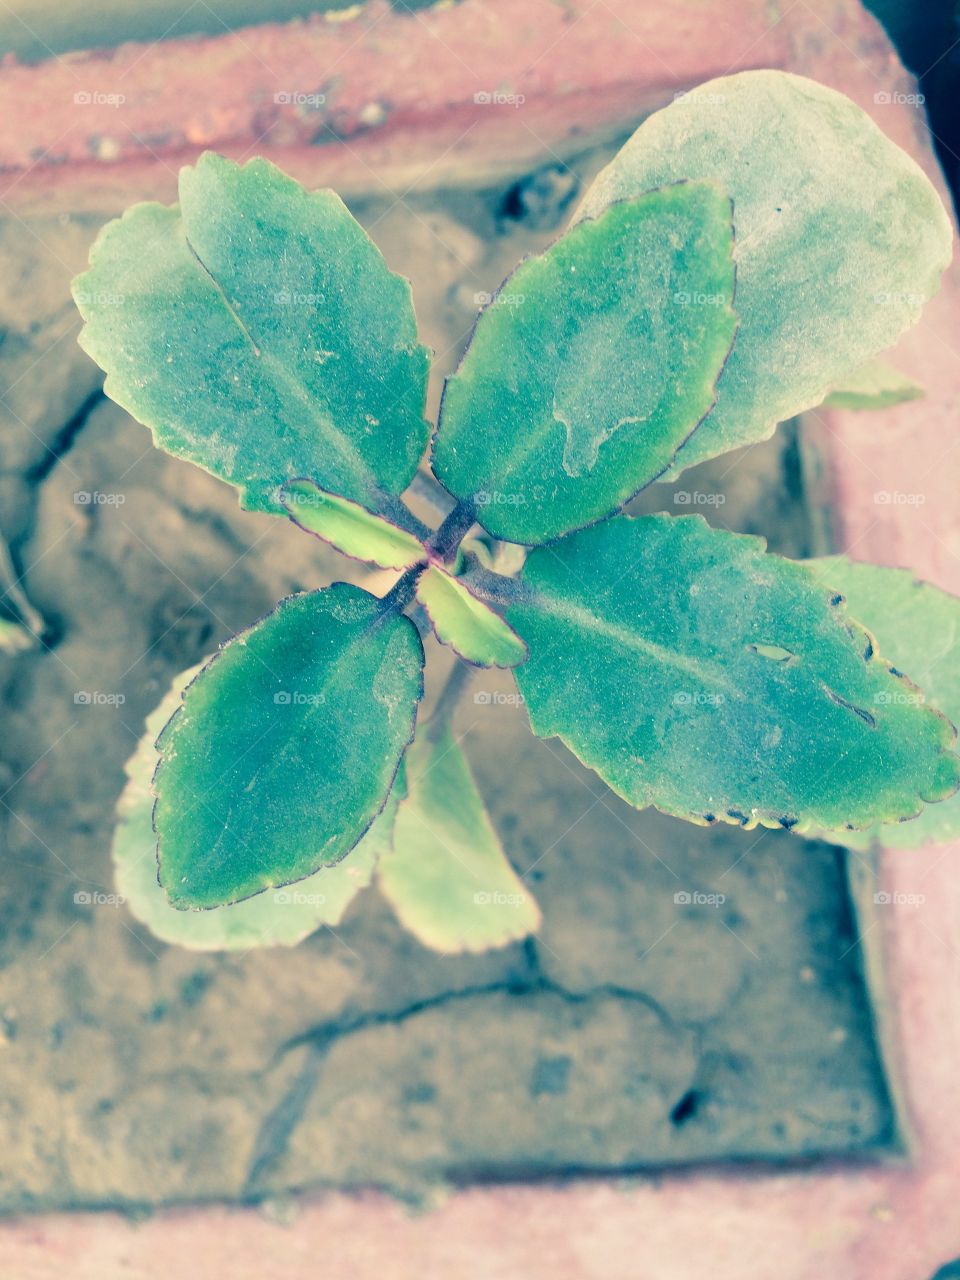 Little green plant with leafs .. st